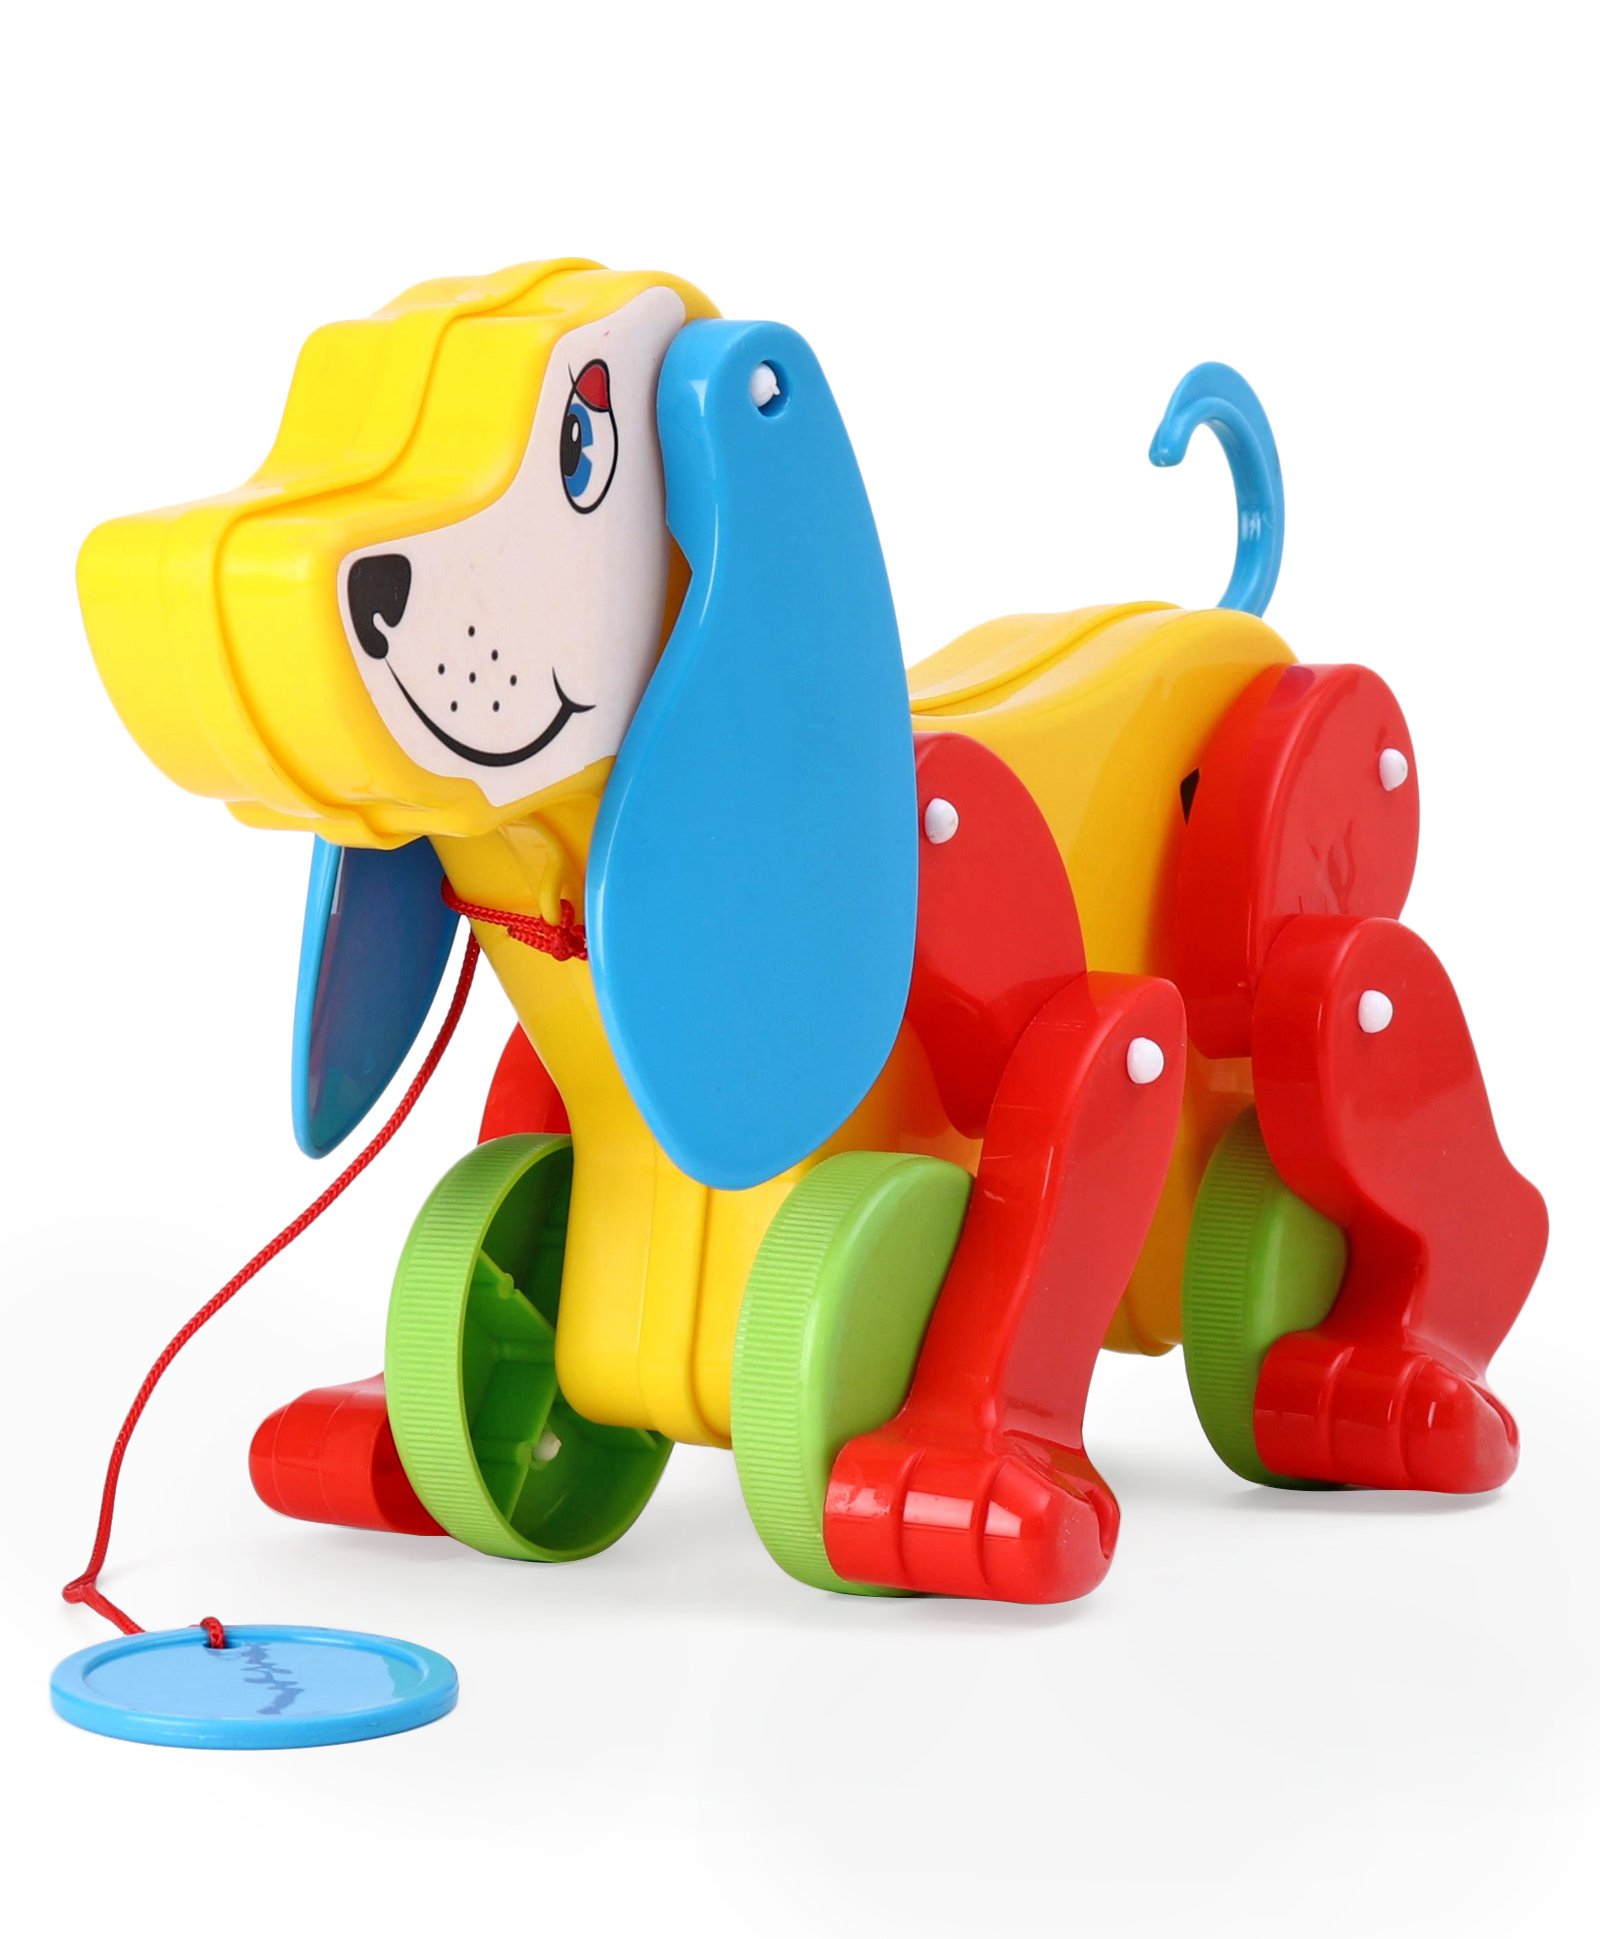 United Agencies Gear Pull Along Dog Toy - Multicolor Online India, Buy Pull  Along Toys for (0-24 Months) at  - 8832775